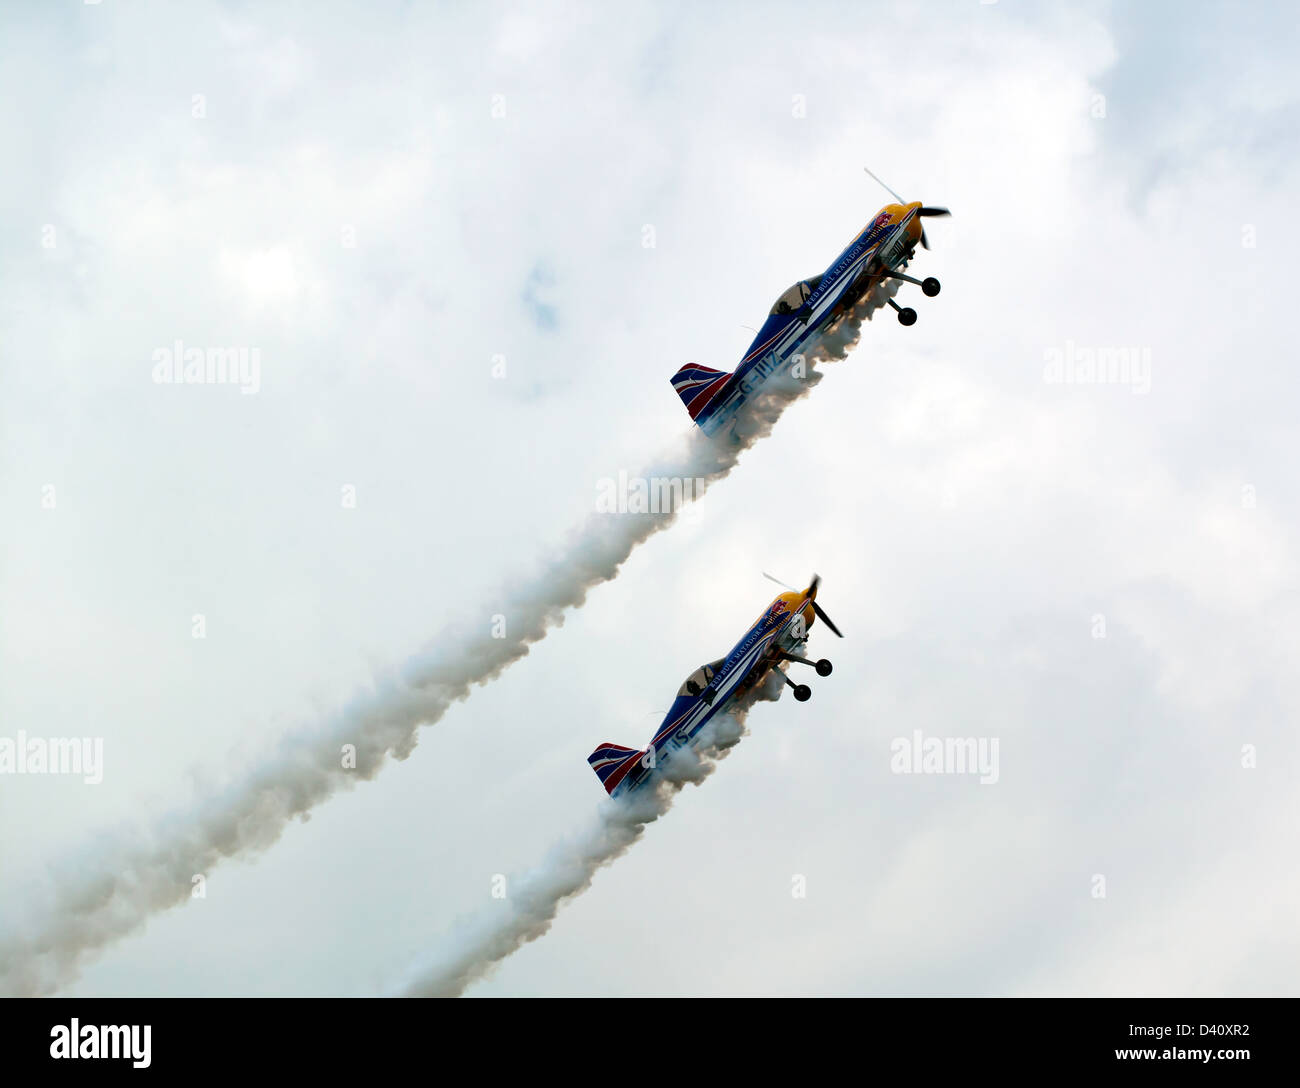 The Red Bull Matadors team pulling up to start their impressive aerobatic display at the Biggin Hill Air Show 2010 Stock Photo